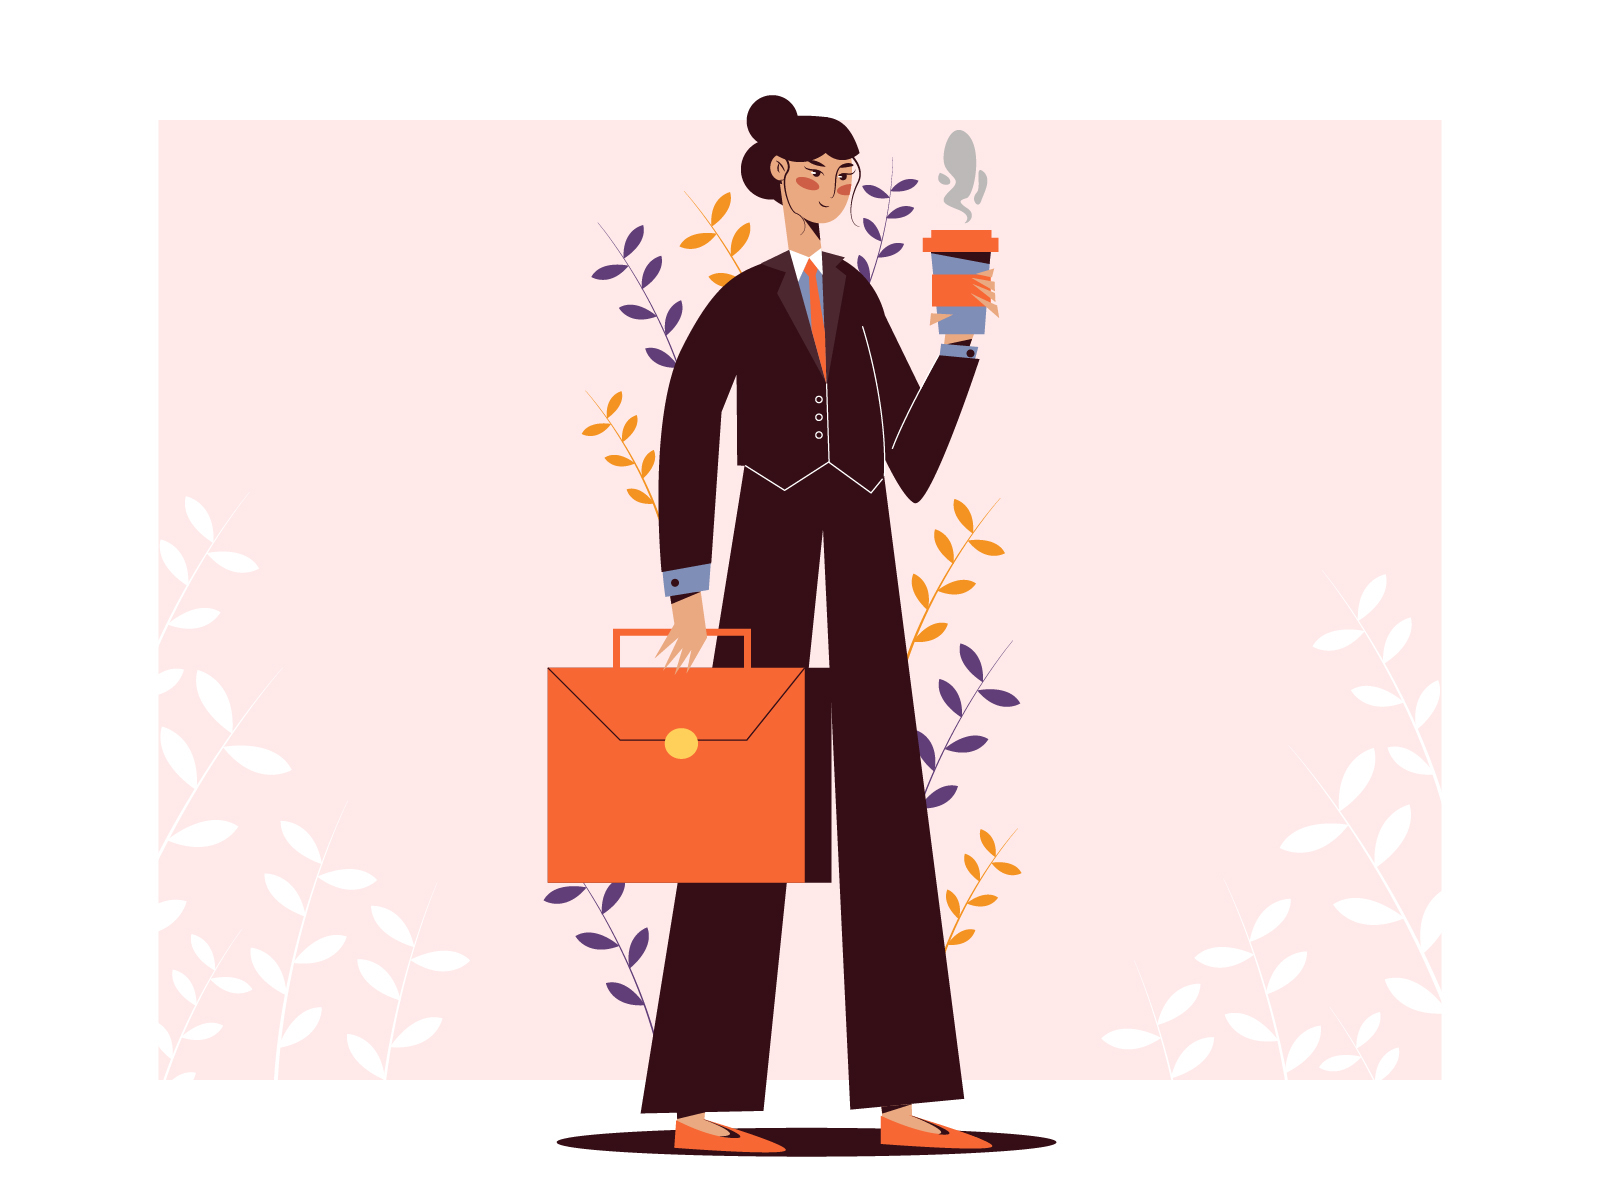 New Women illustrations by Artify by IconShock & ByPeople on Dribbble